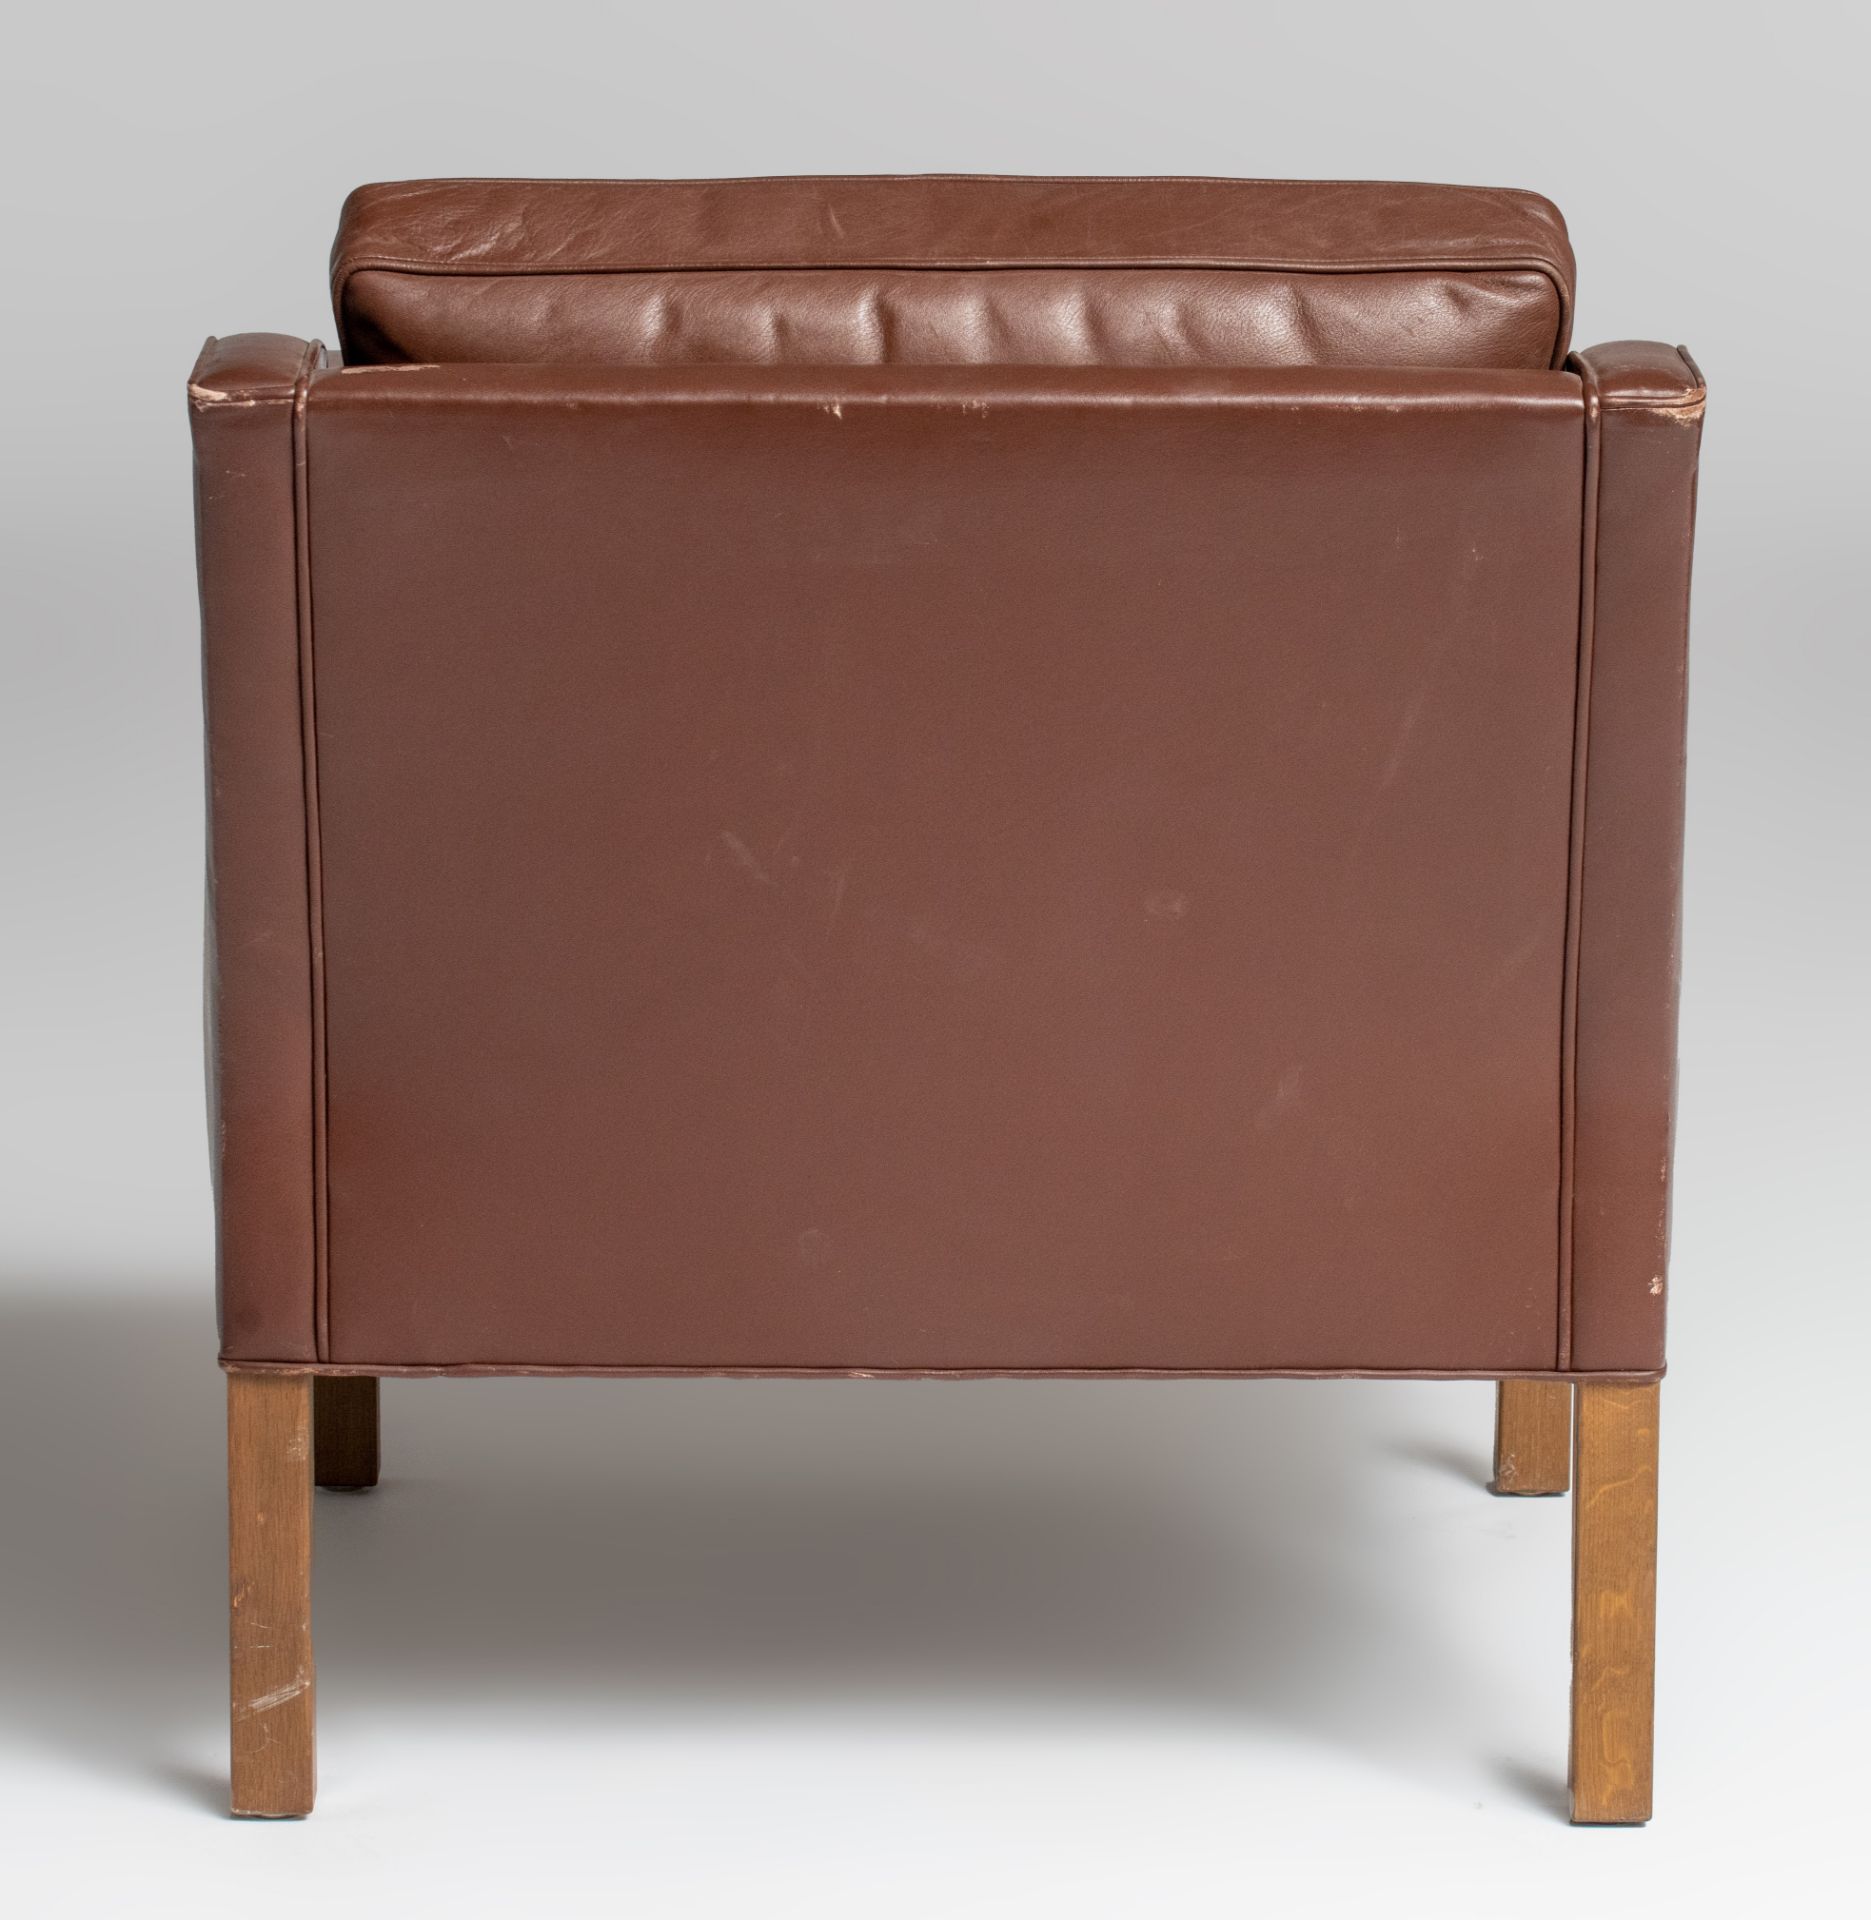 A brown leather armchair by Borge Mogensen for Ed Fredericia Stolefabrik, 1970, H 75 - W 71 cm - Image 6 of 13